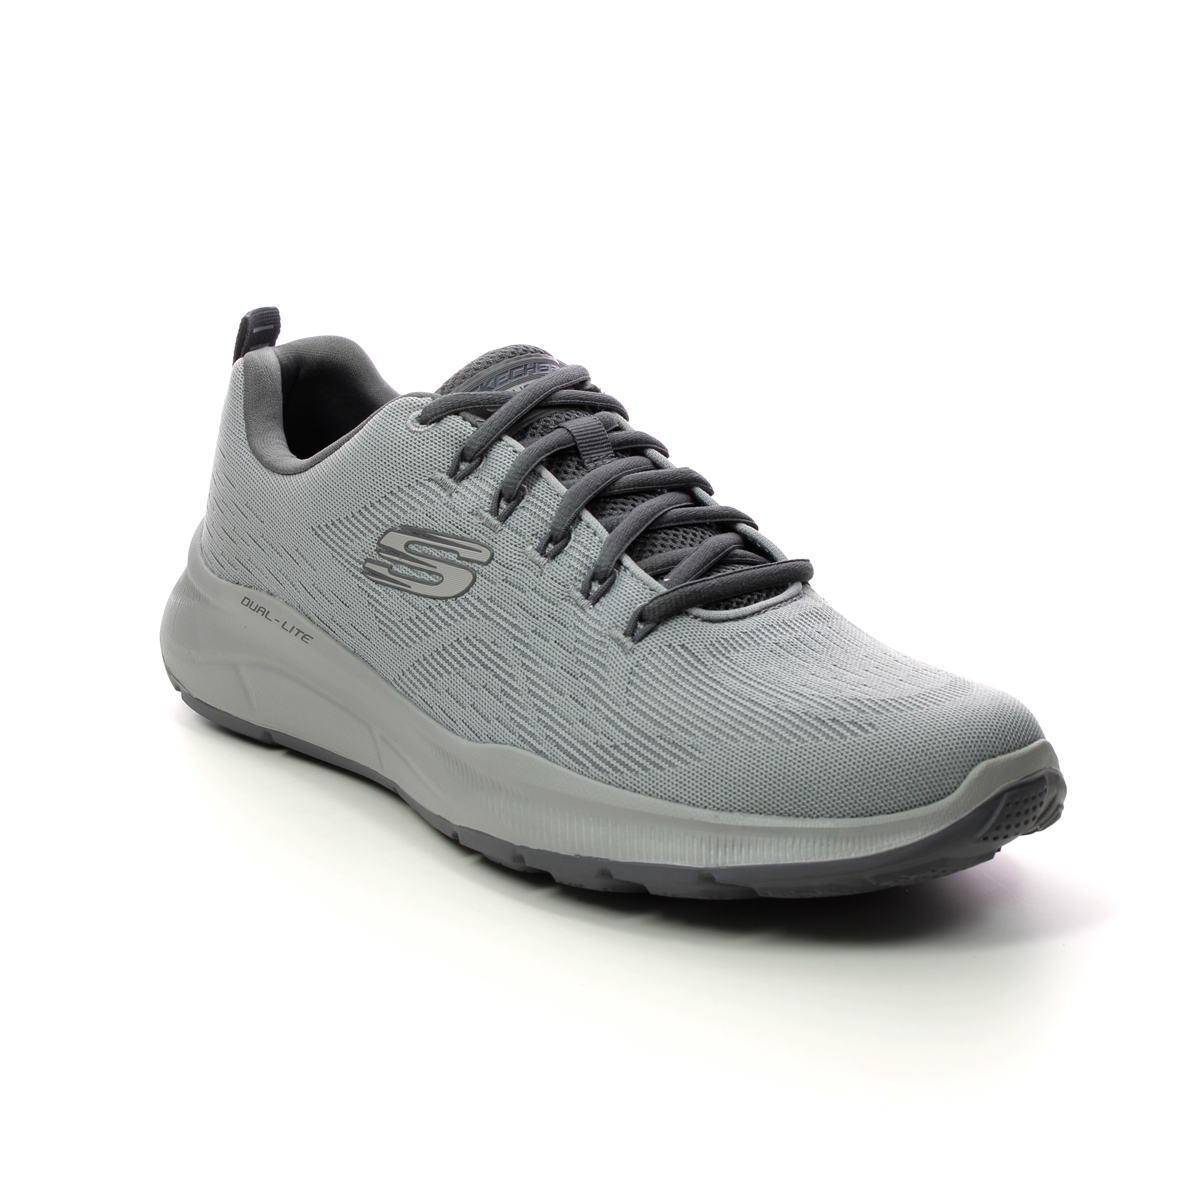 Skechers Equalizer 5 Grey Charcoal Mens Trainers 232519 In Size 10 In Plain Grey Charcoal